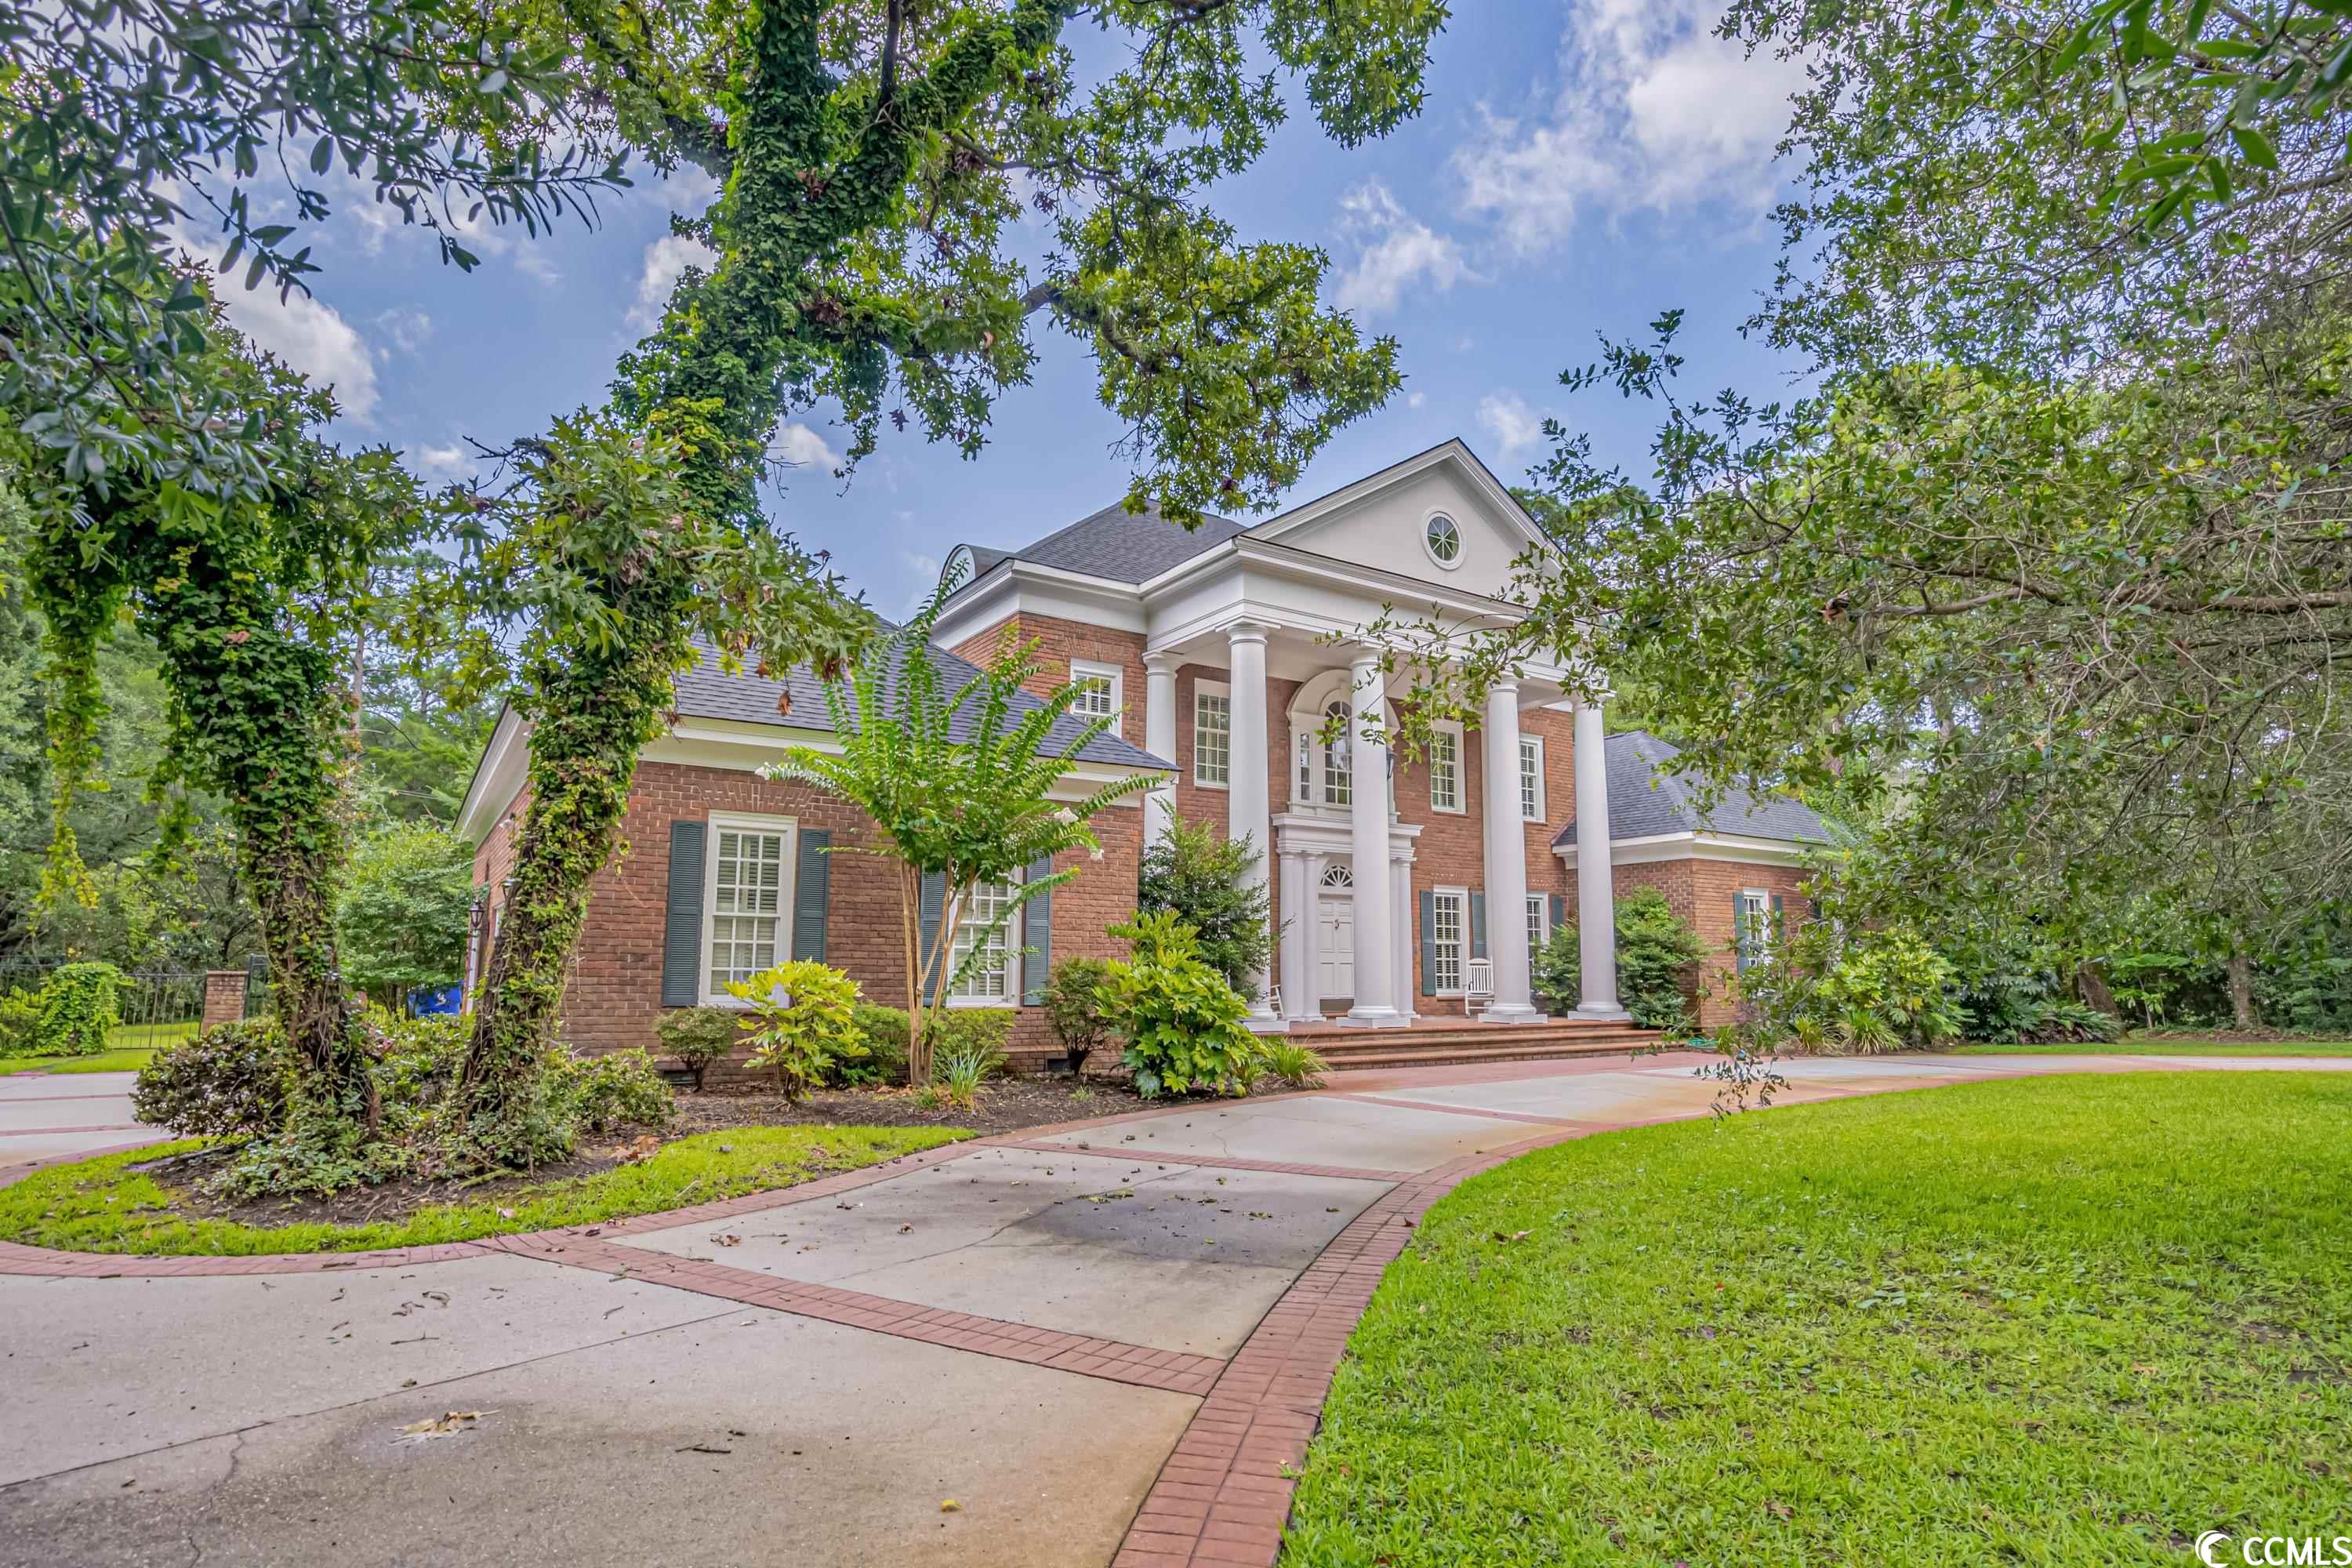 Myrtle Beach home for sale Myrtle Beach Briarcliffe Acres